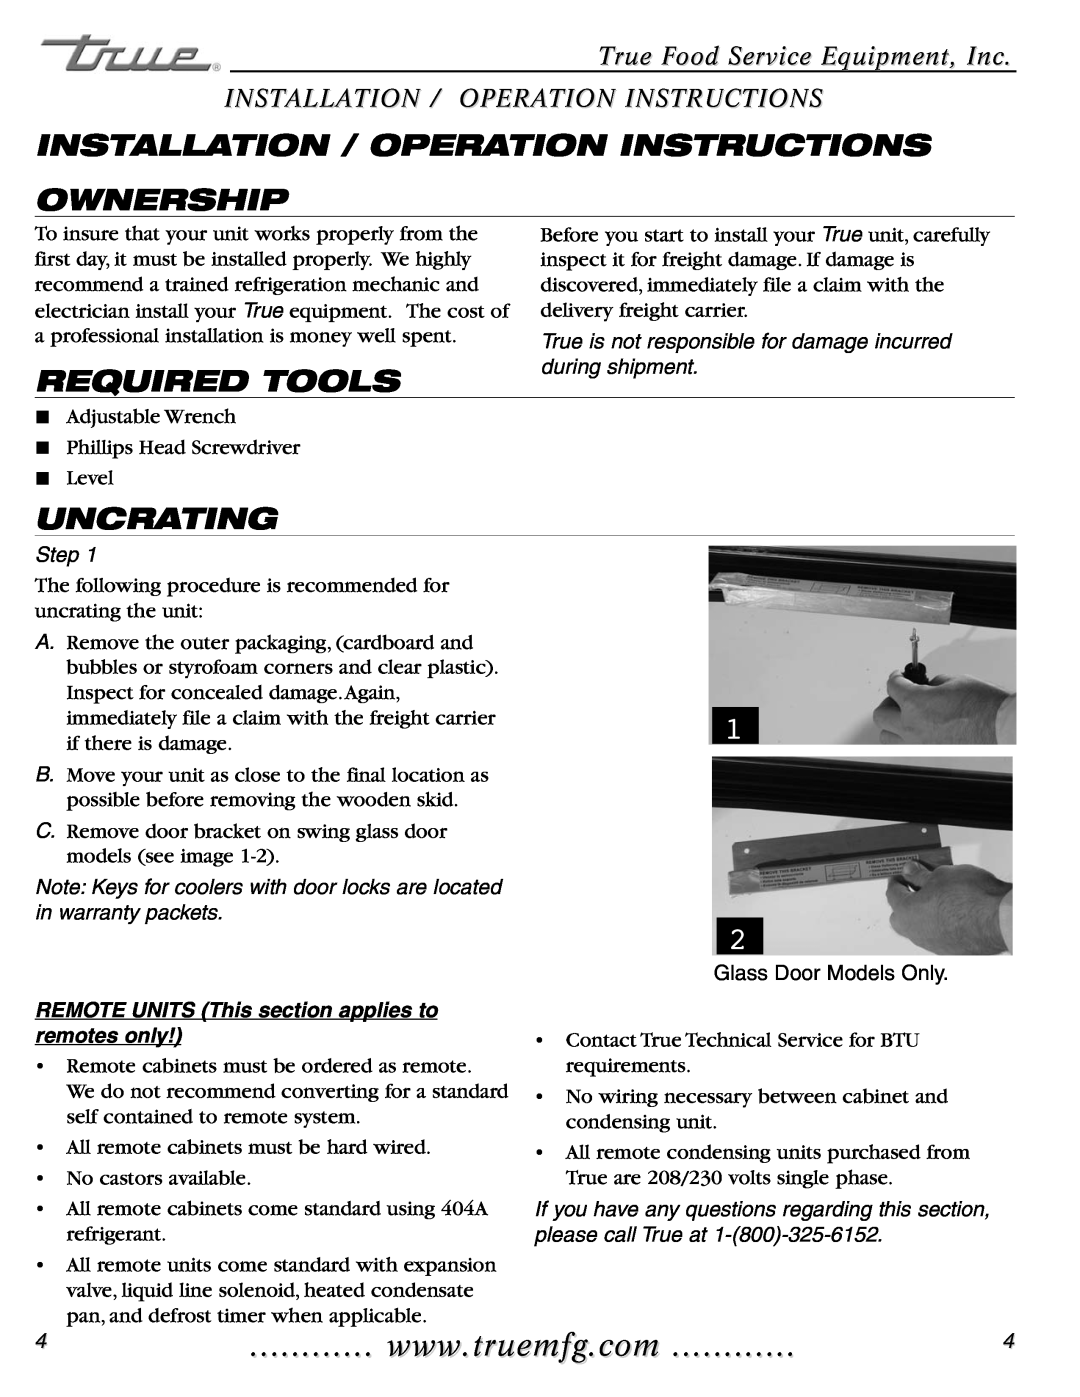 True Manufacturing Company TWT-44F-HD, TWT-60F Installation / Operation Instructions Ownership, Required Tools, Uncrating 